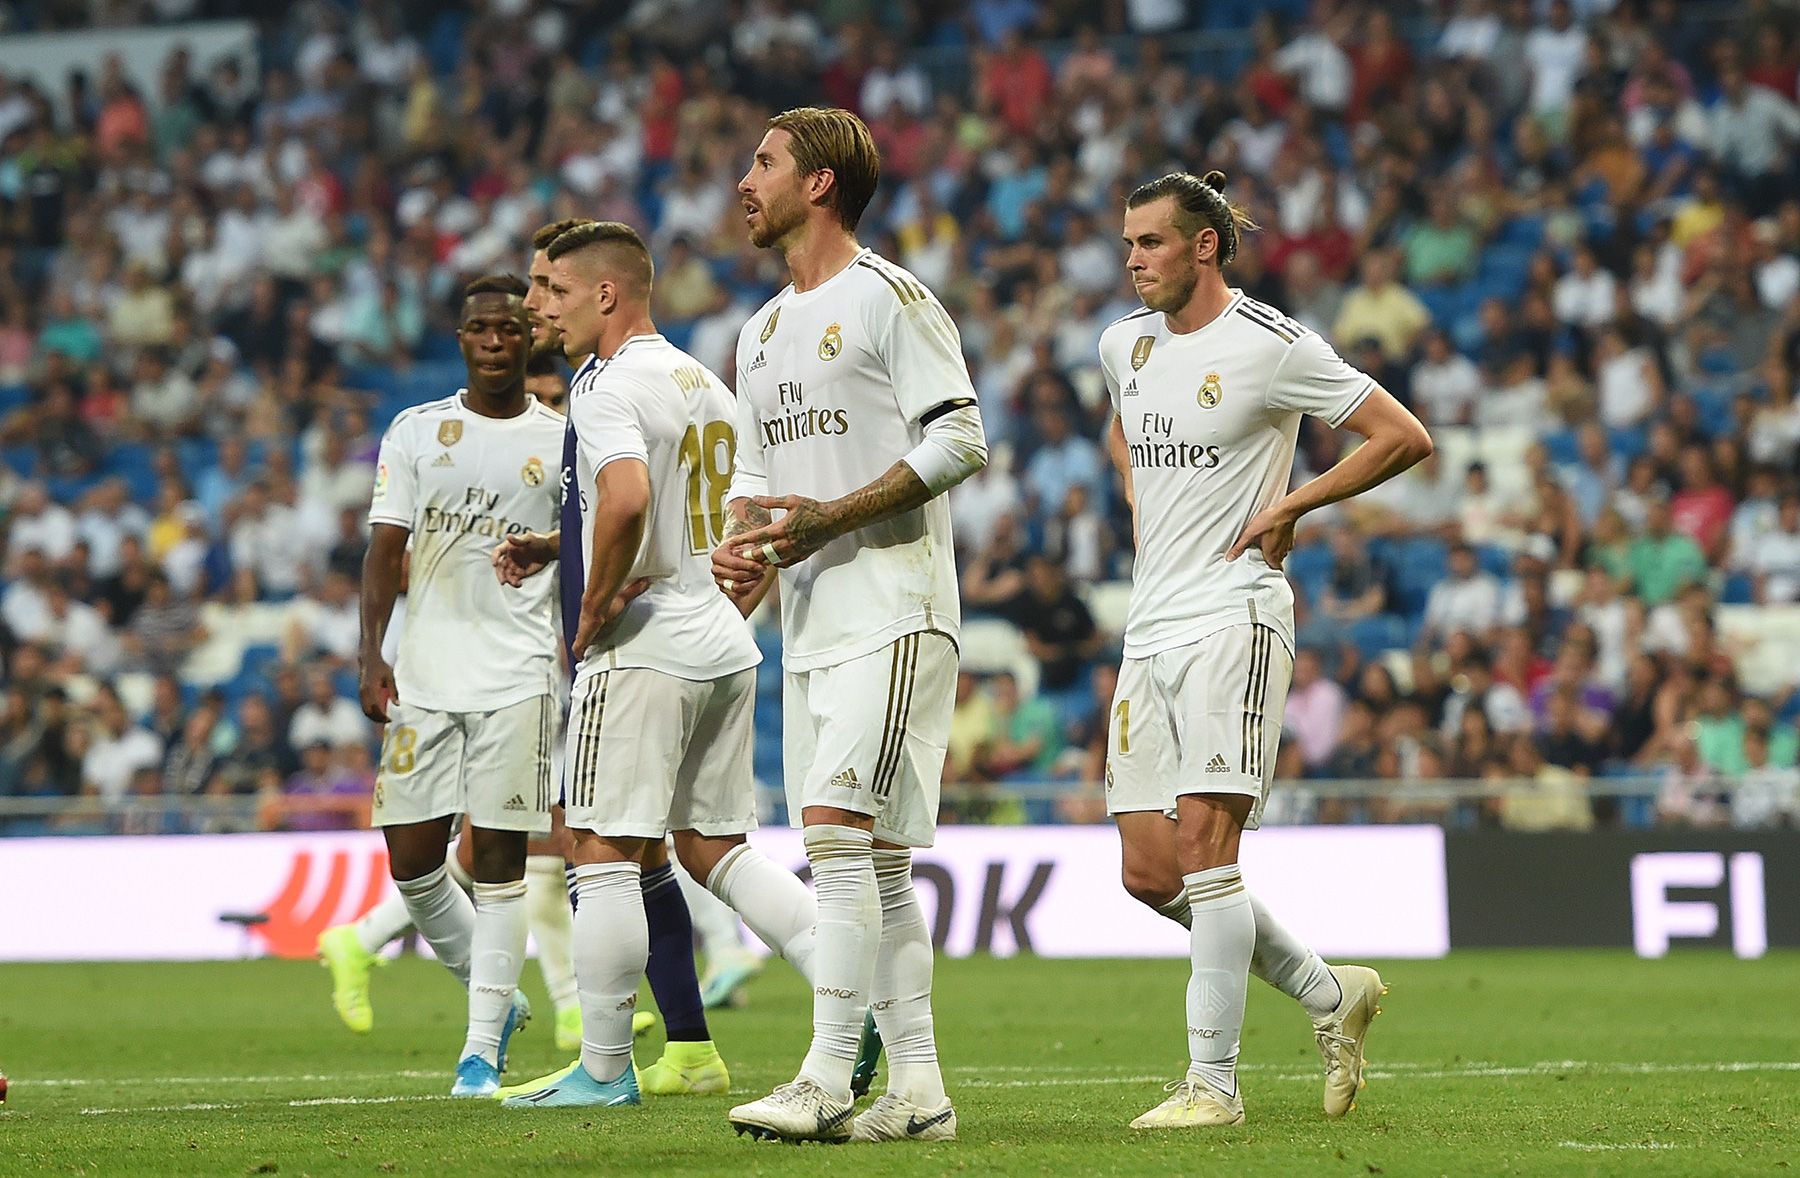 The players of the Madrid after the tie against the Valladolid